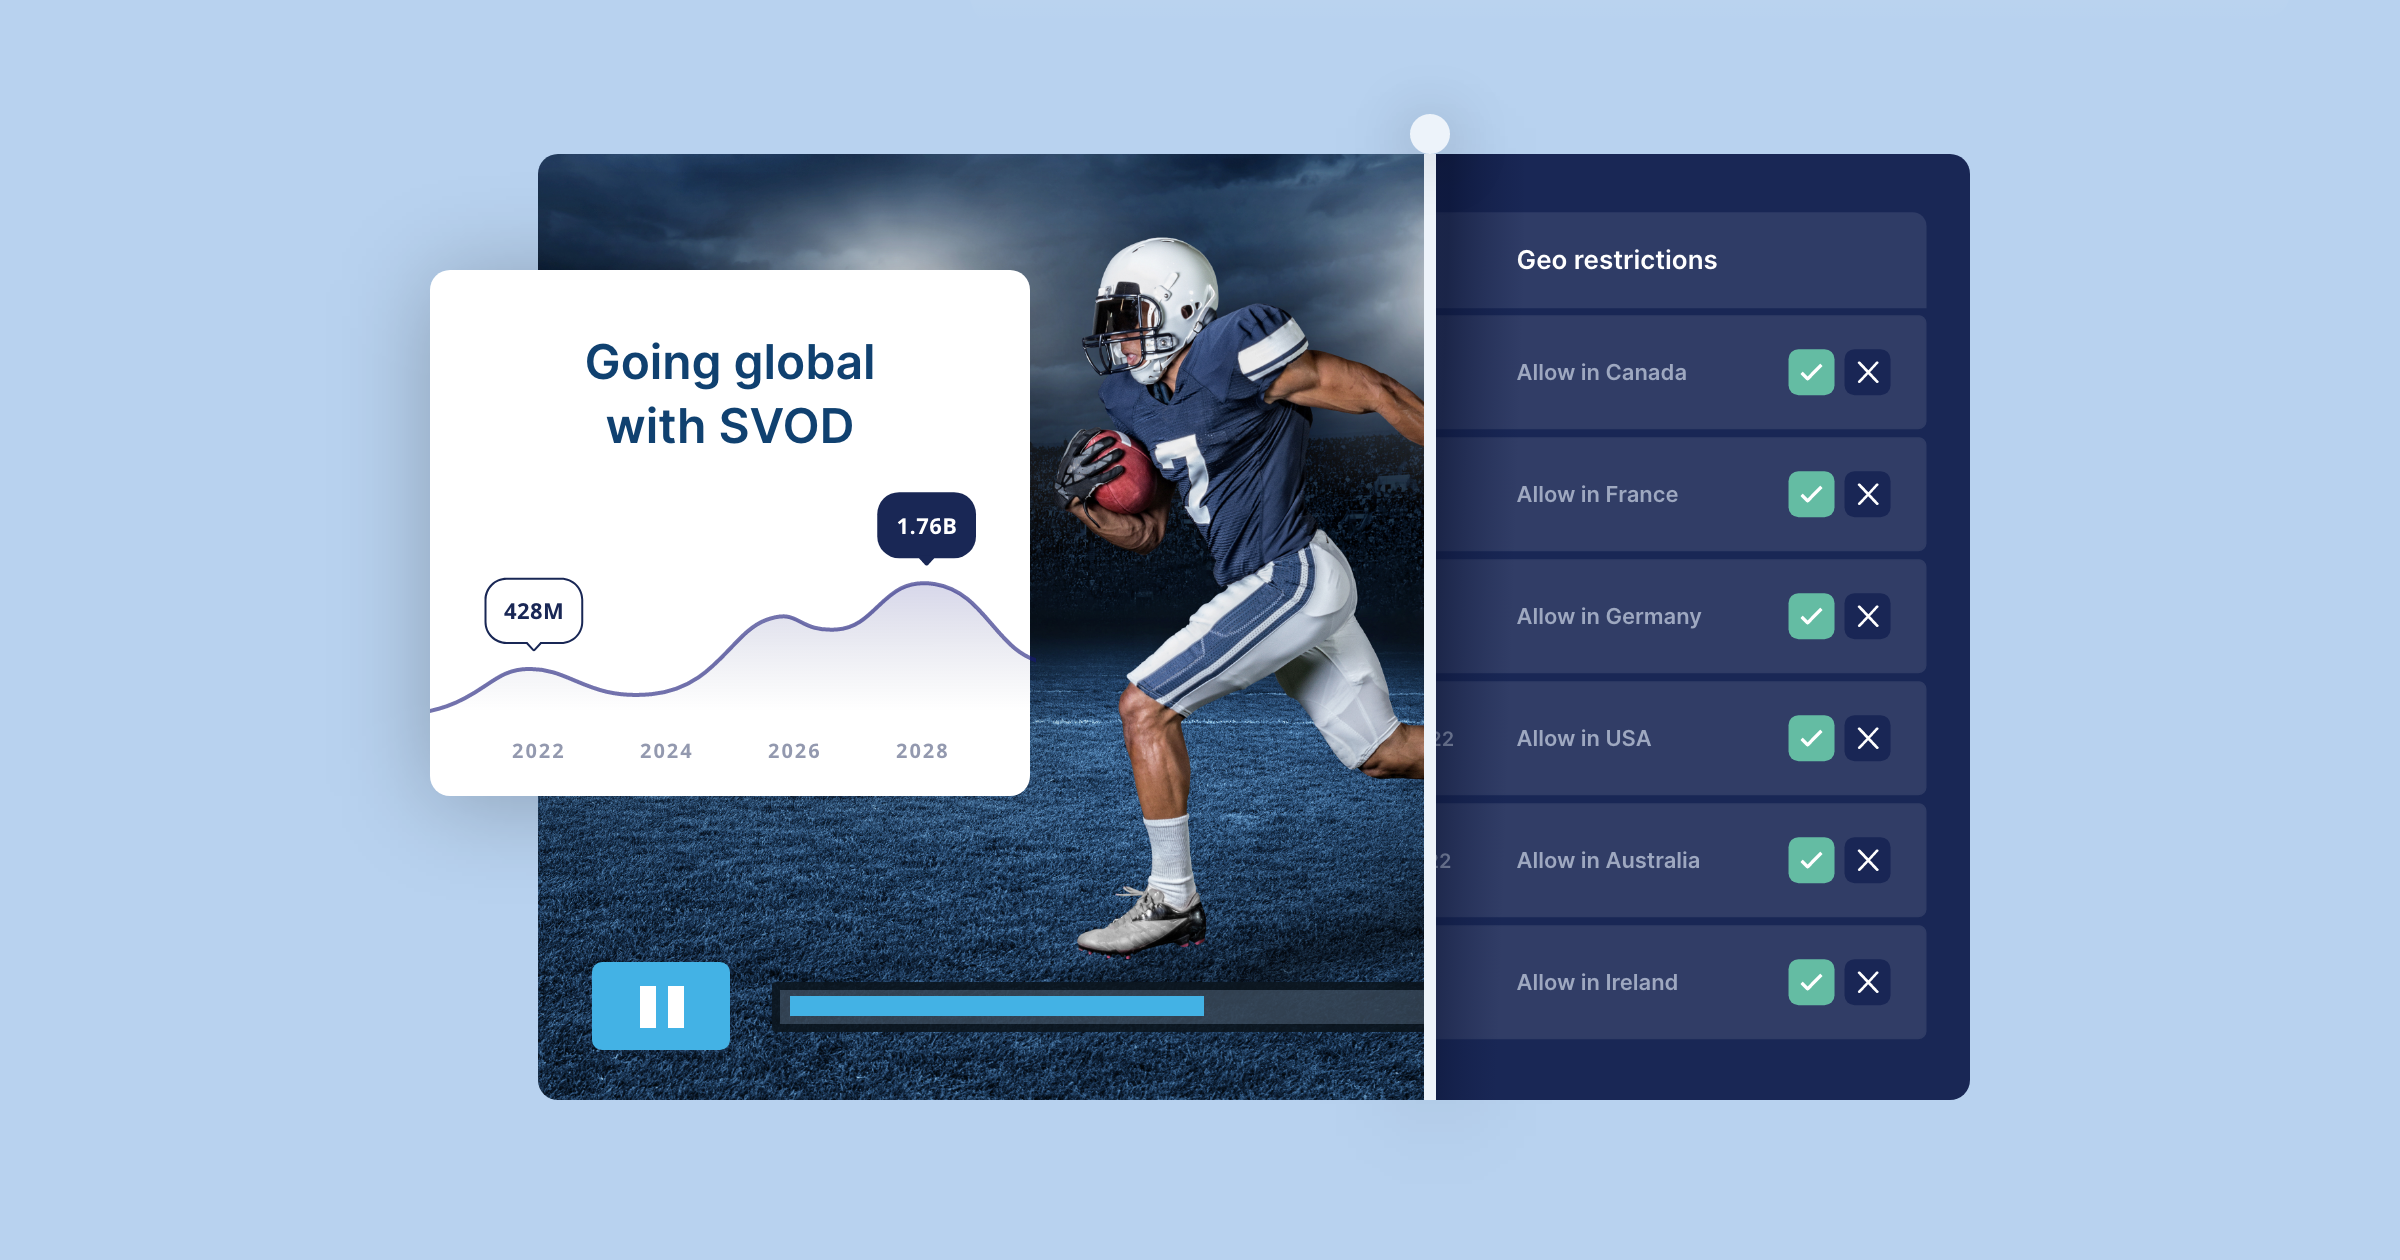 Going global with SVOD